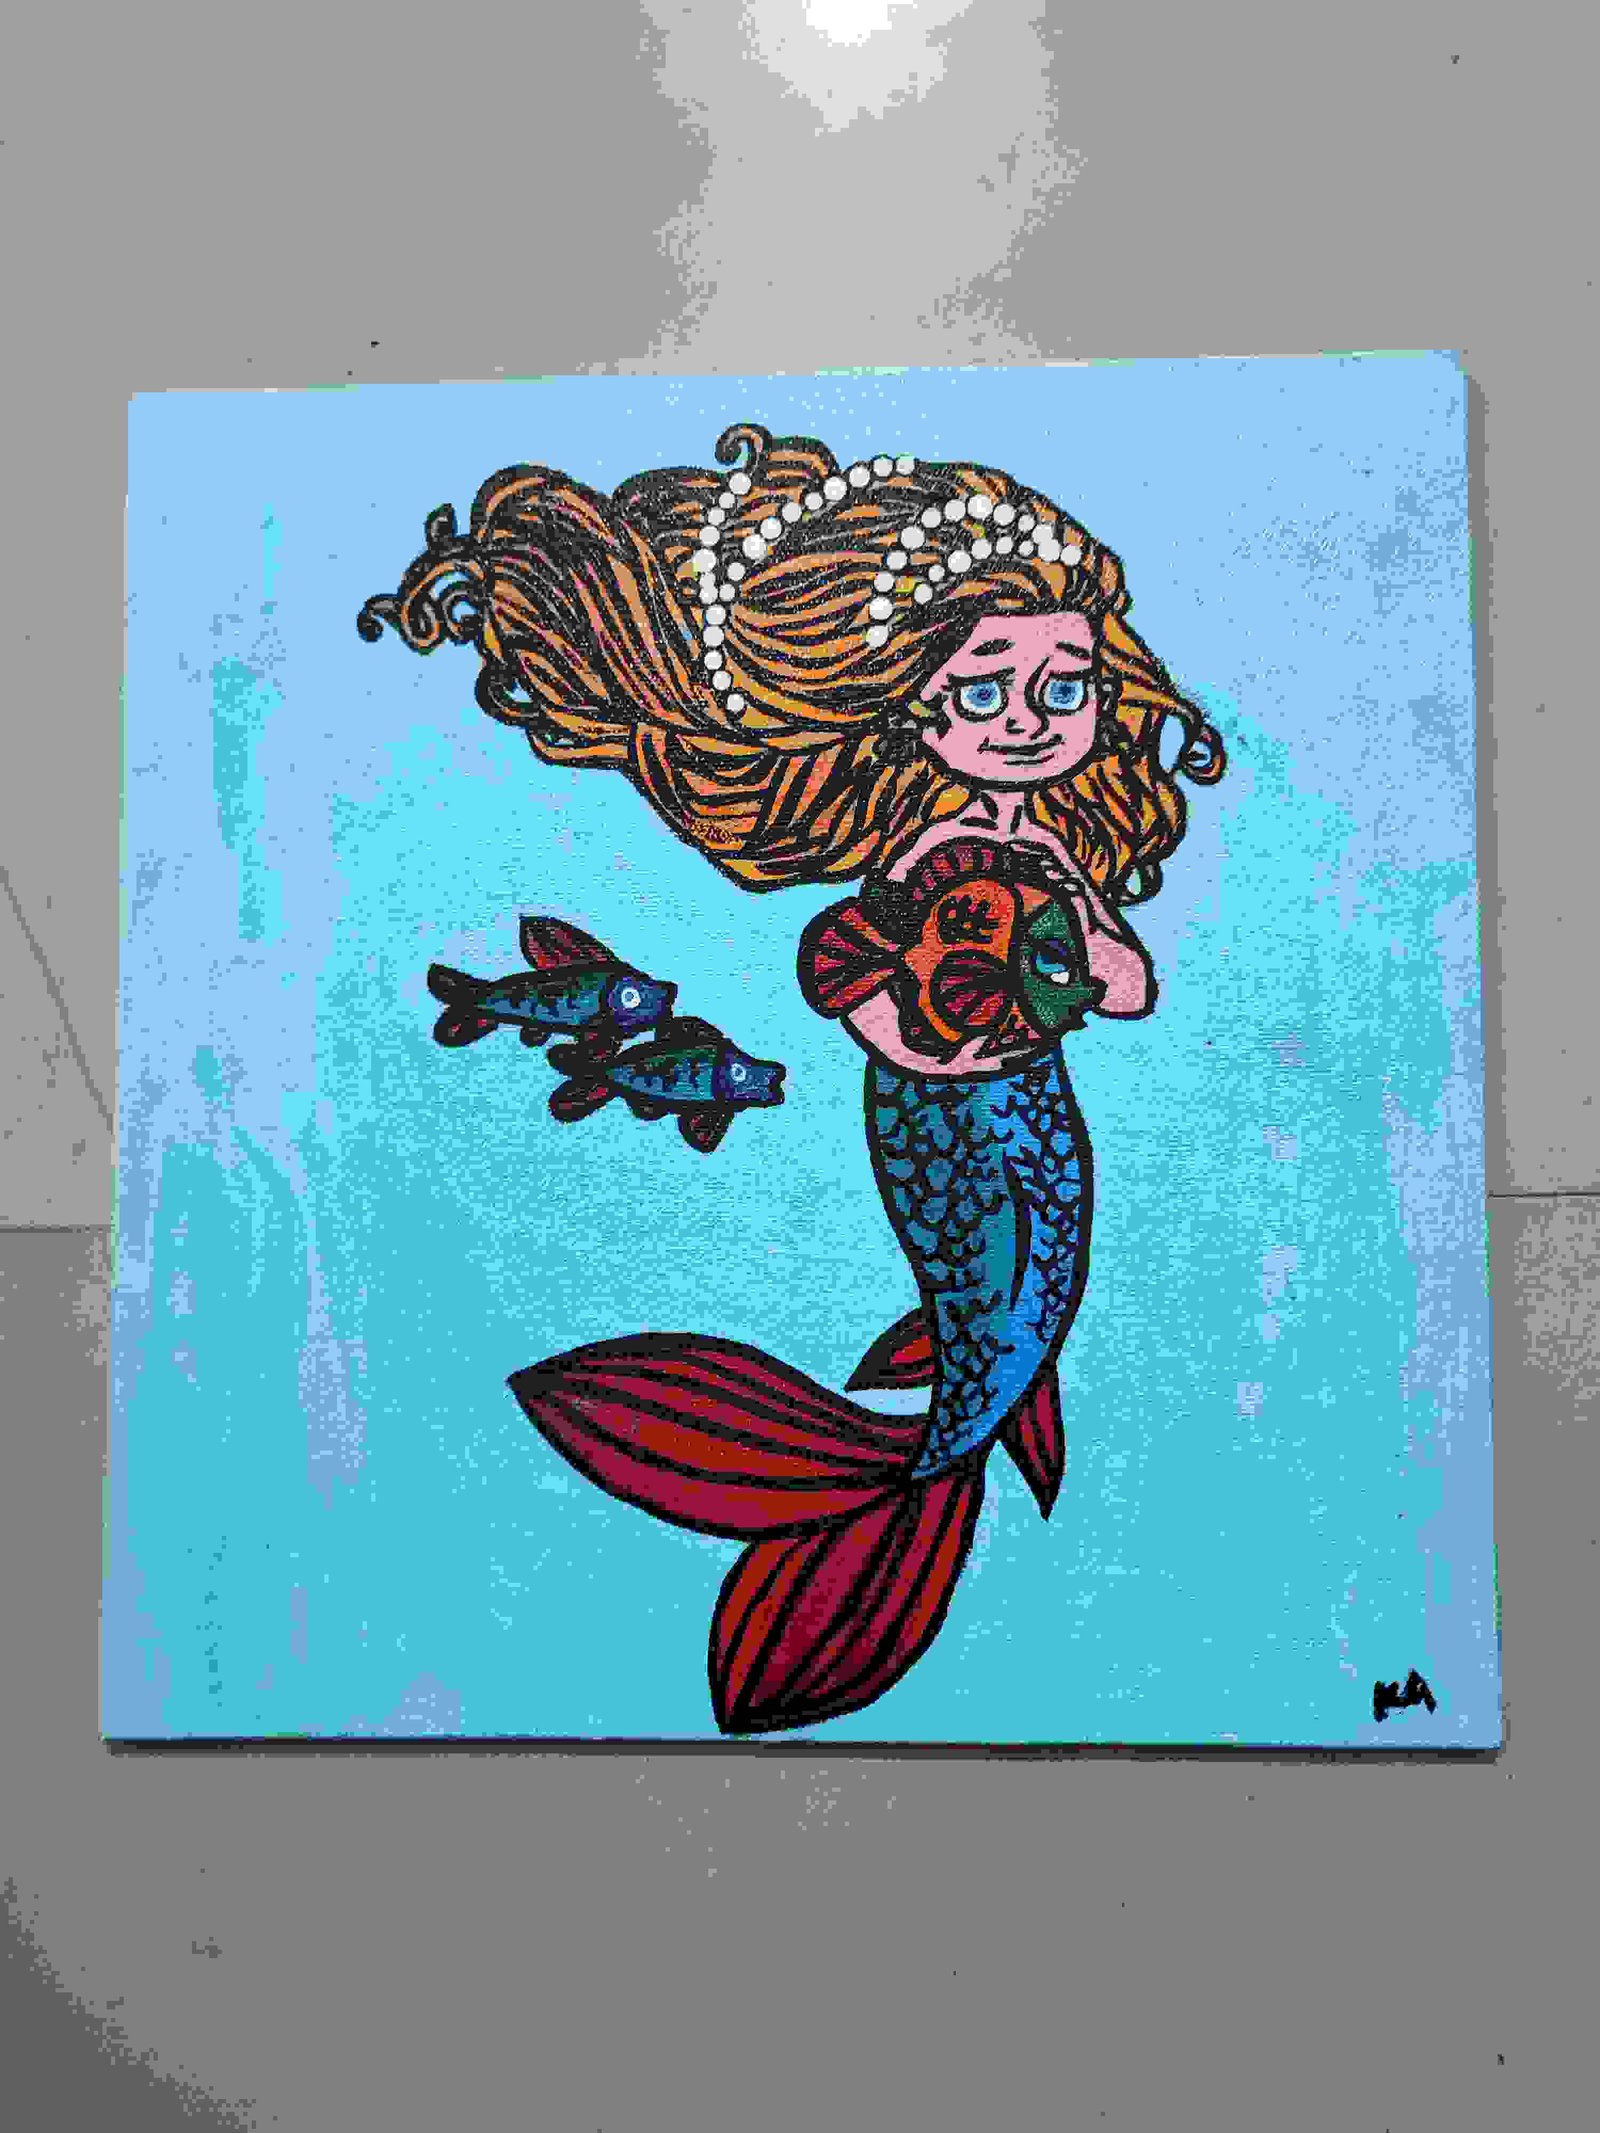 Painting Of Mermaid In Acrylic Painting Size 3030 Sq Cm Price 100 Form